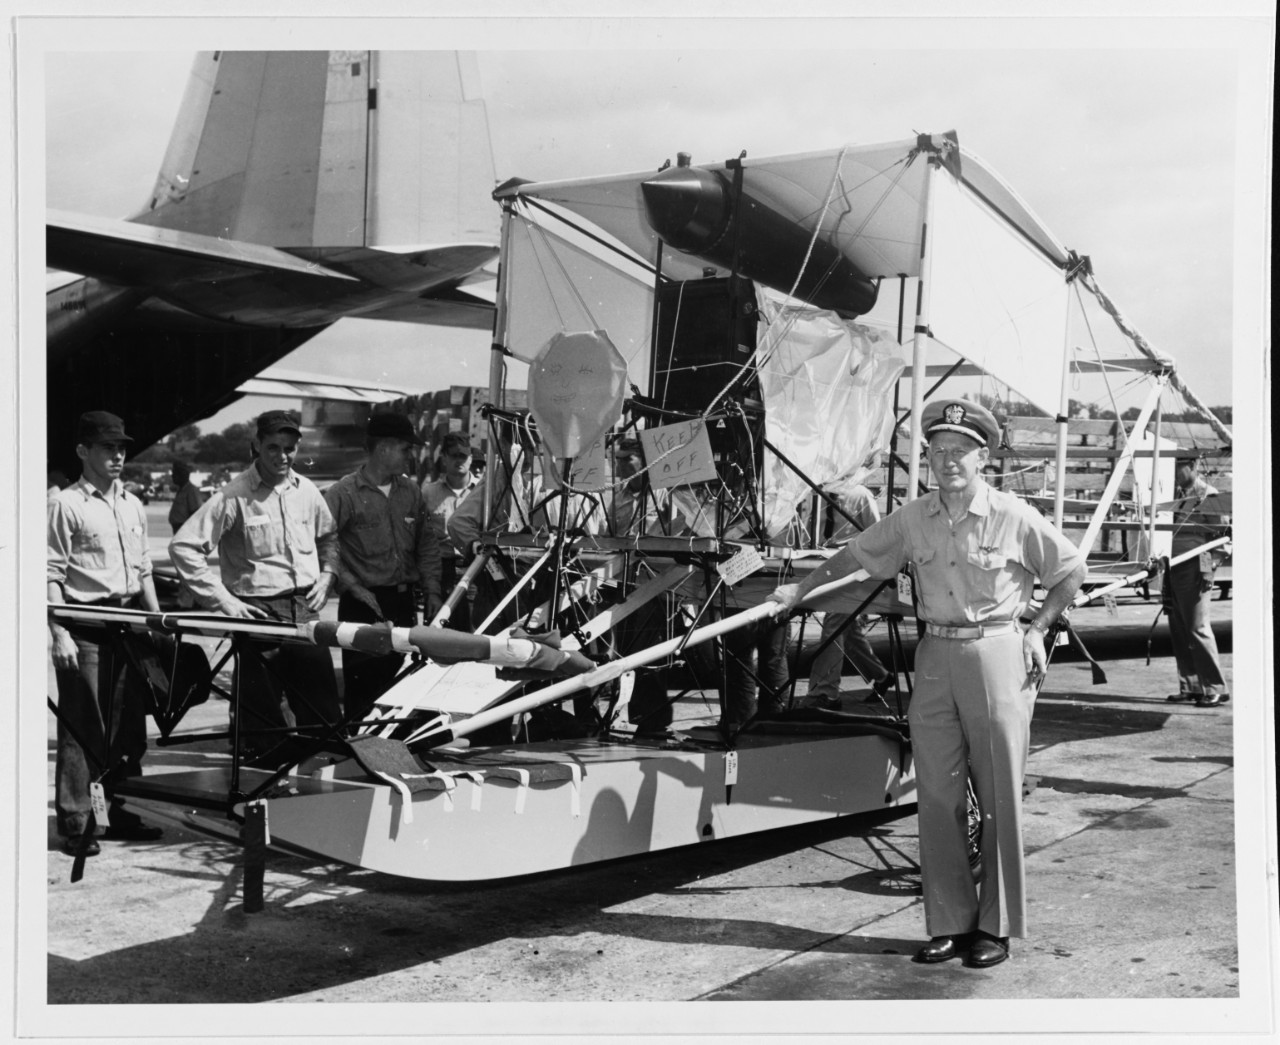 Captain George F. Rice, USN, with replica of the Curtiss A-1